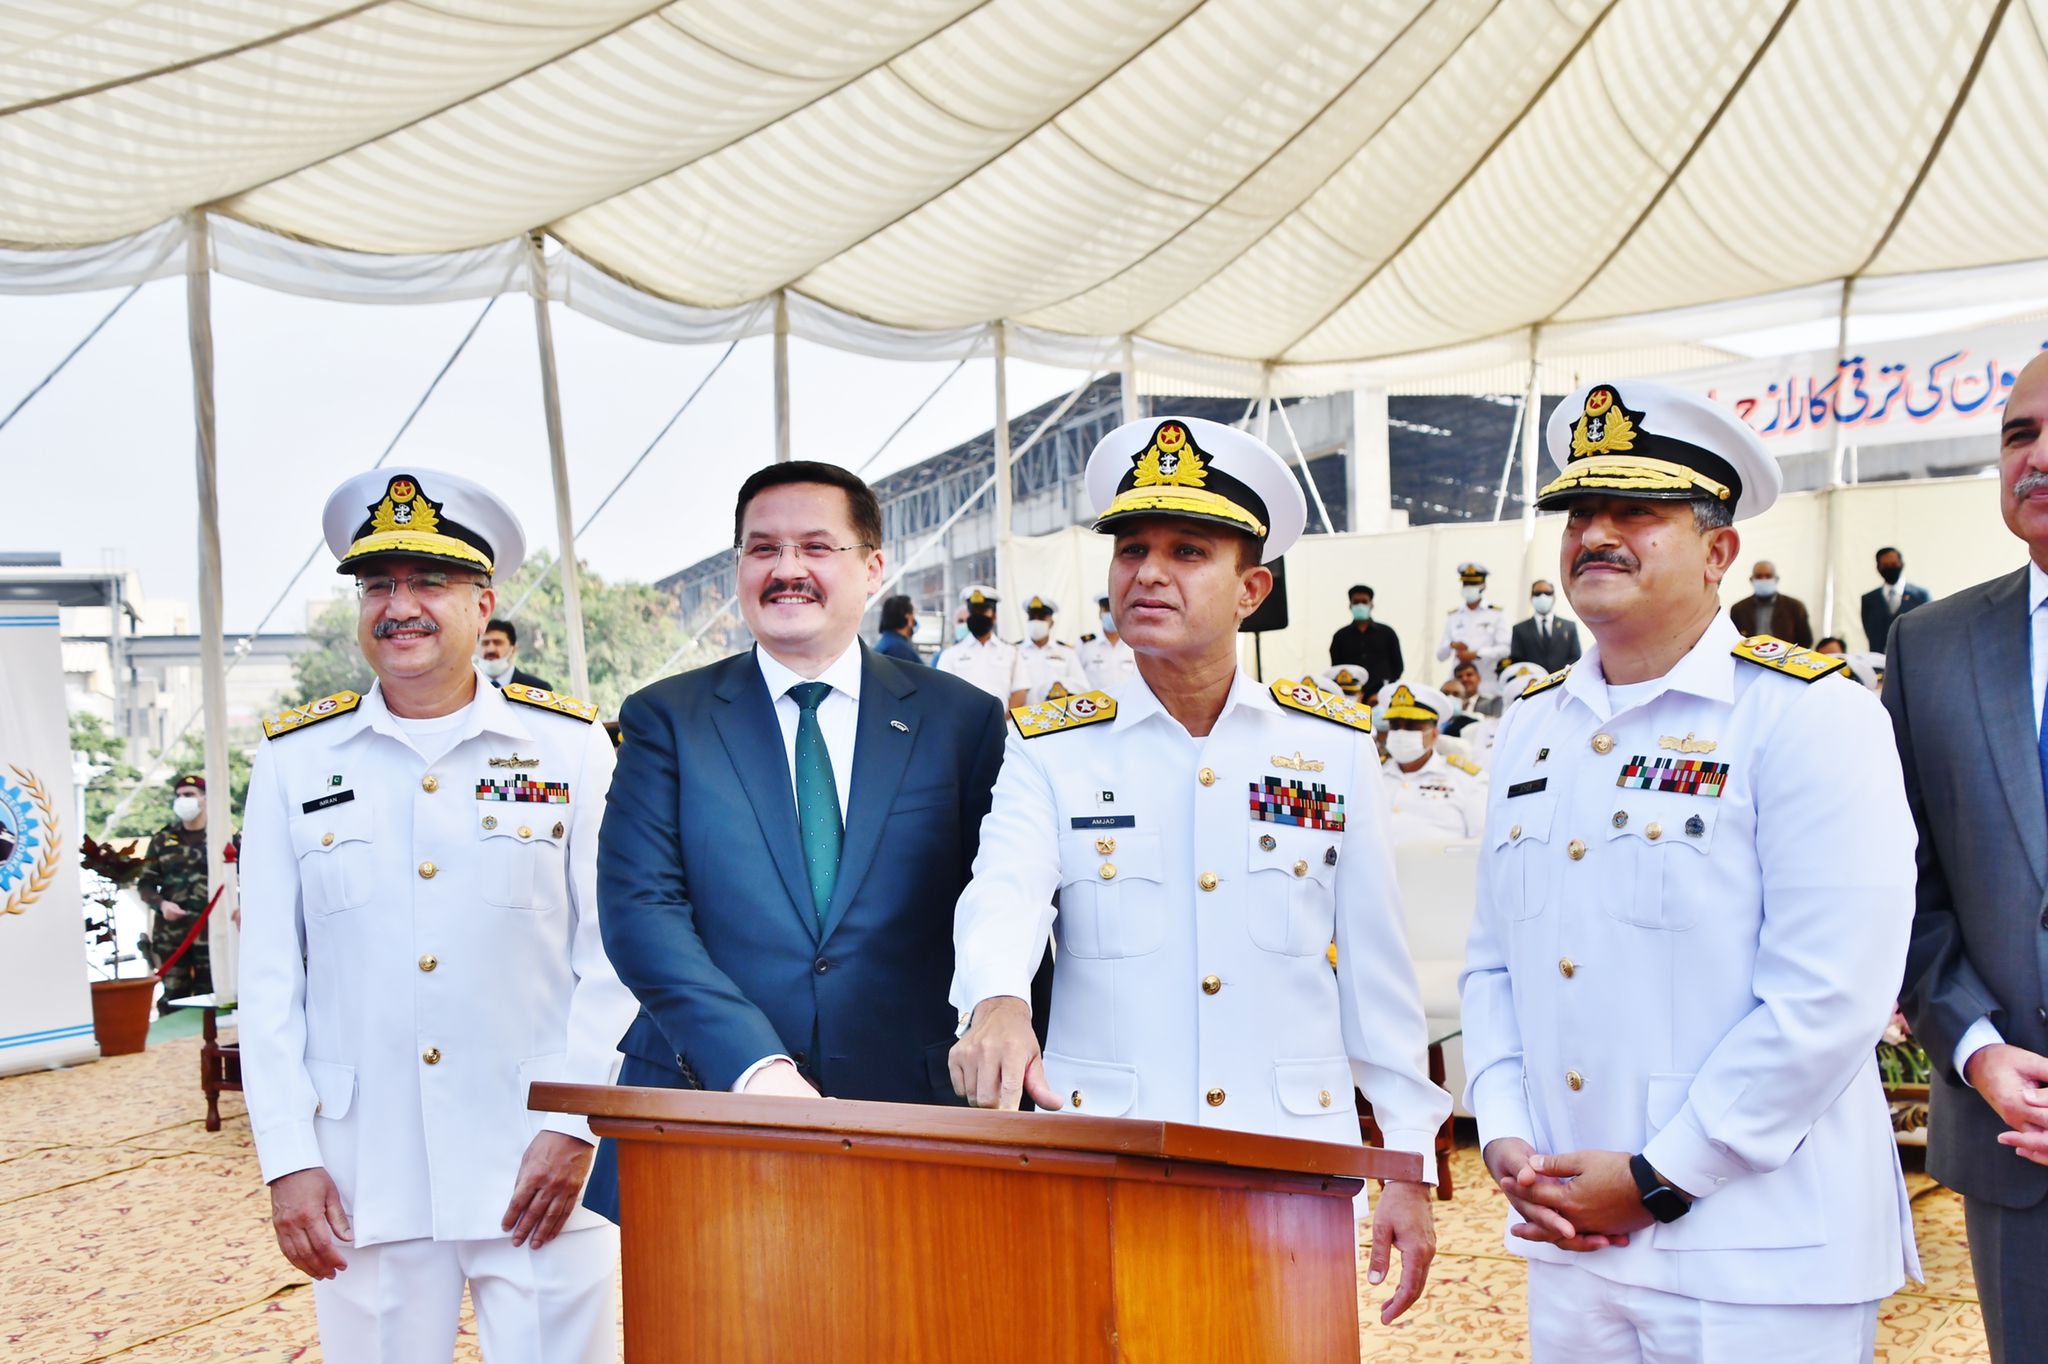  ASFAT Held Keel-Laying Ceremony for Pakistan’s  PN Milgem-4 Frigate